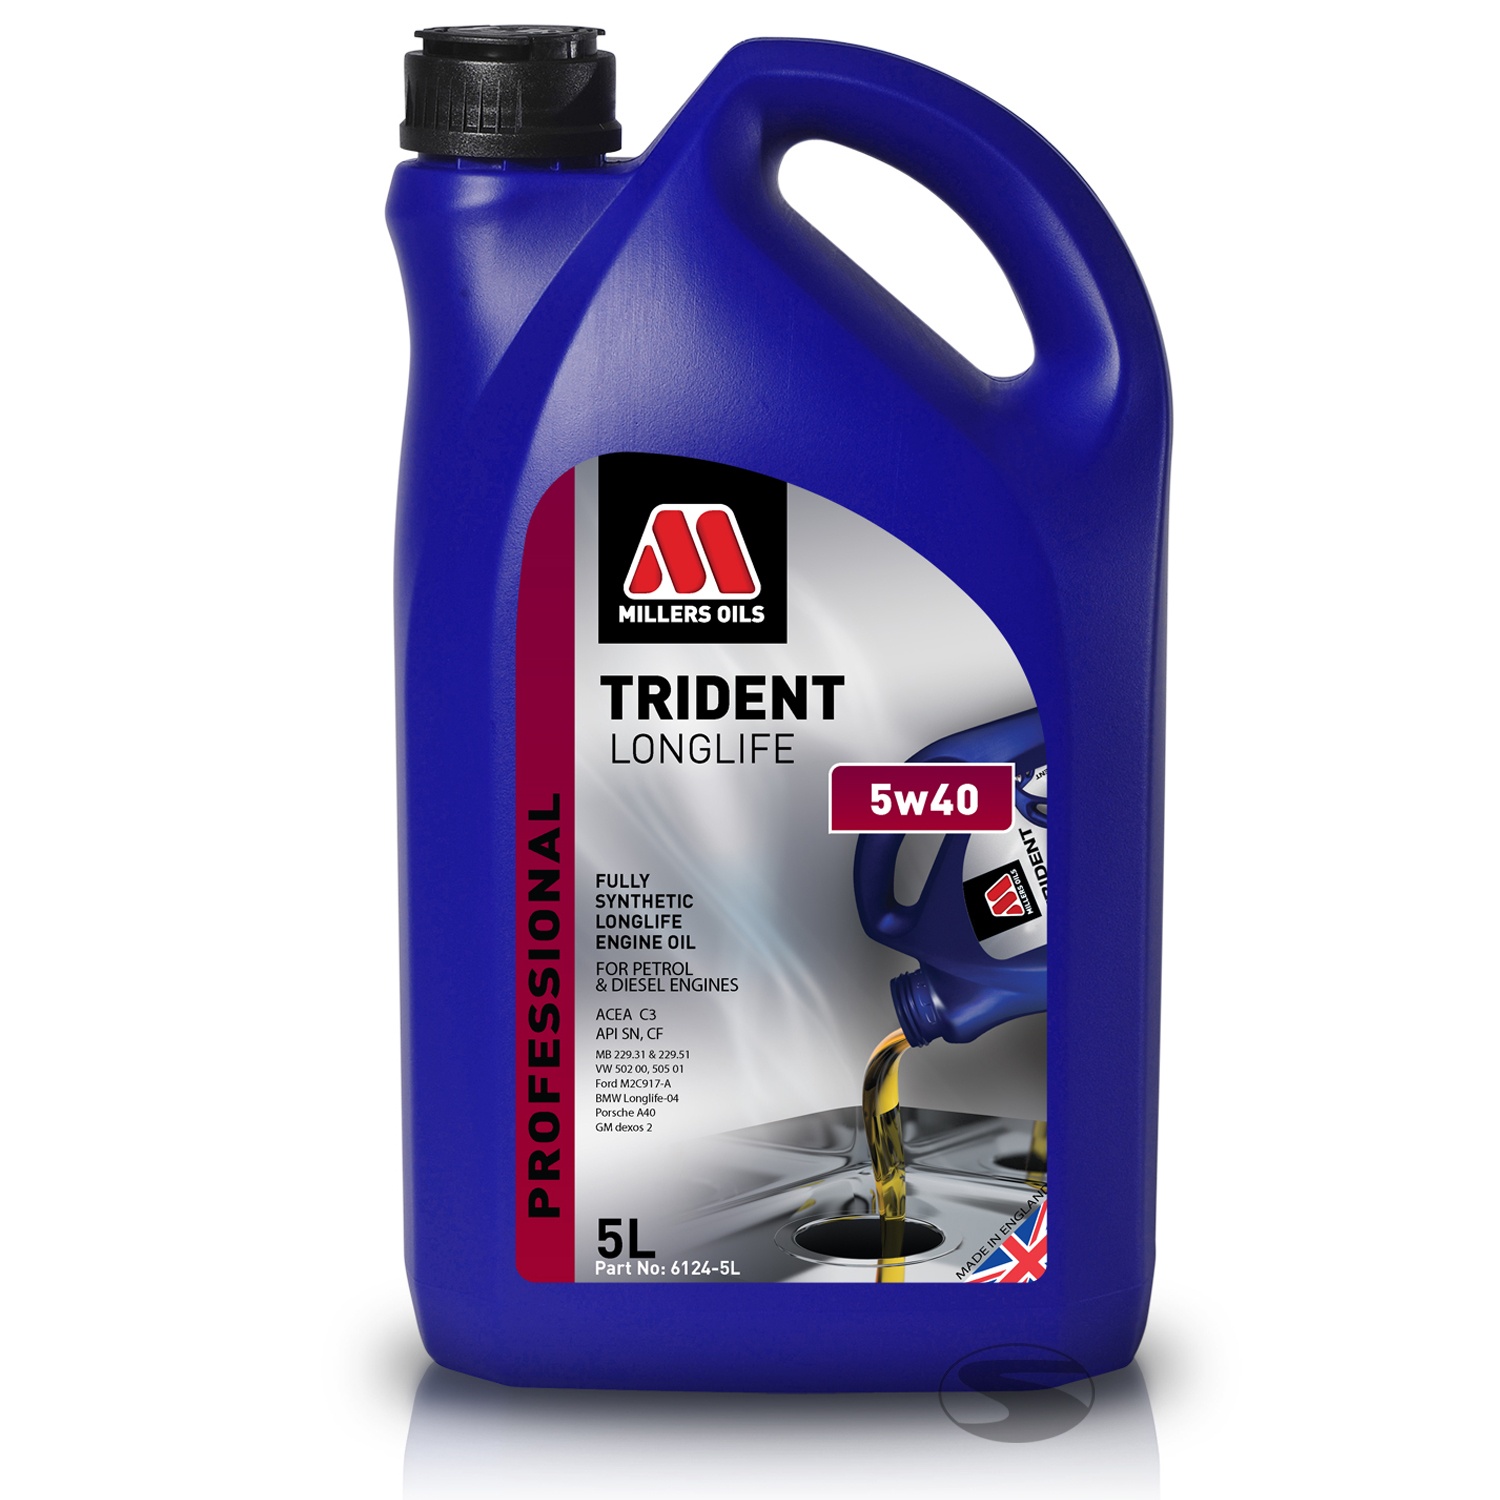 Millers Oils Trident Longlife 5W40 Full Synthetic_5 Liter_150196